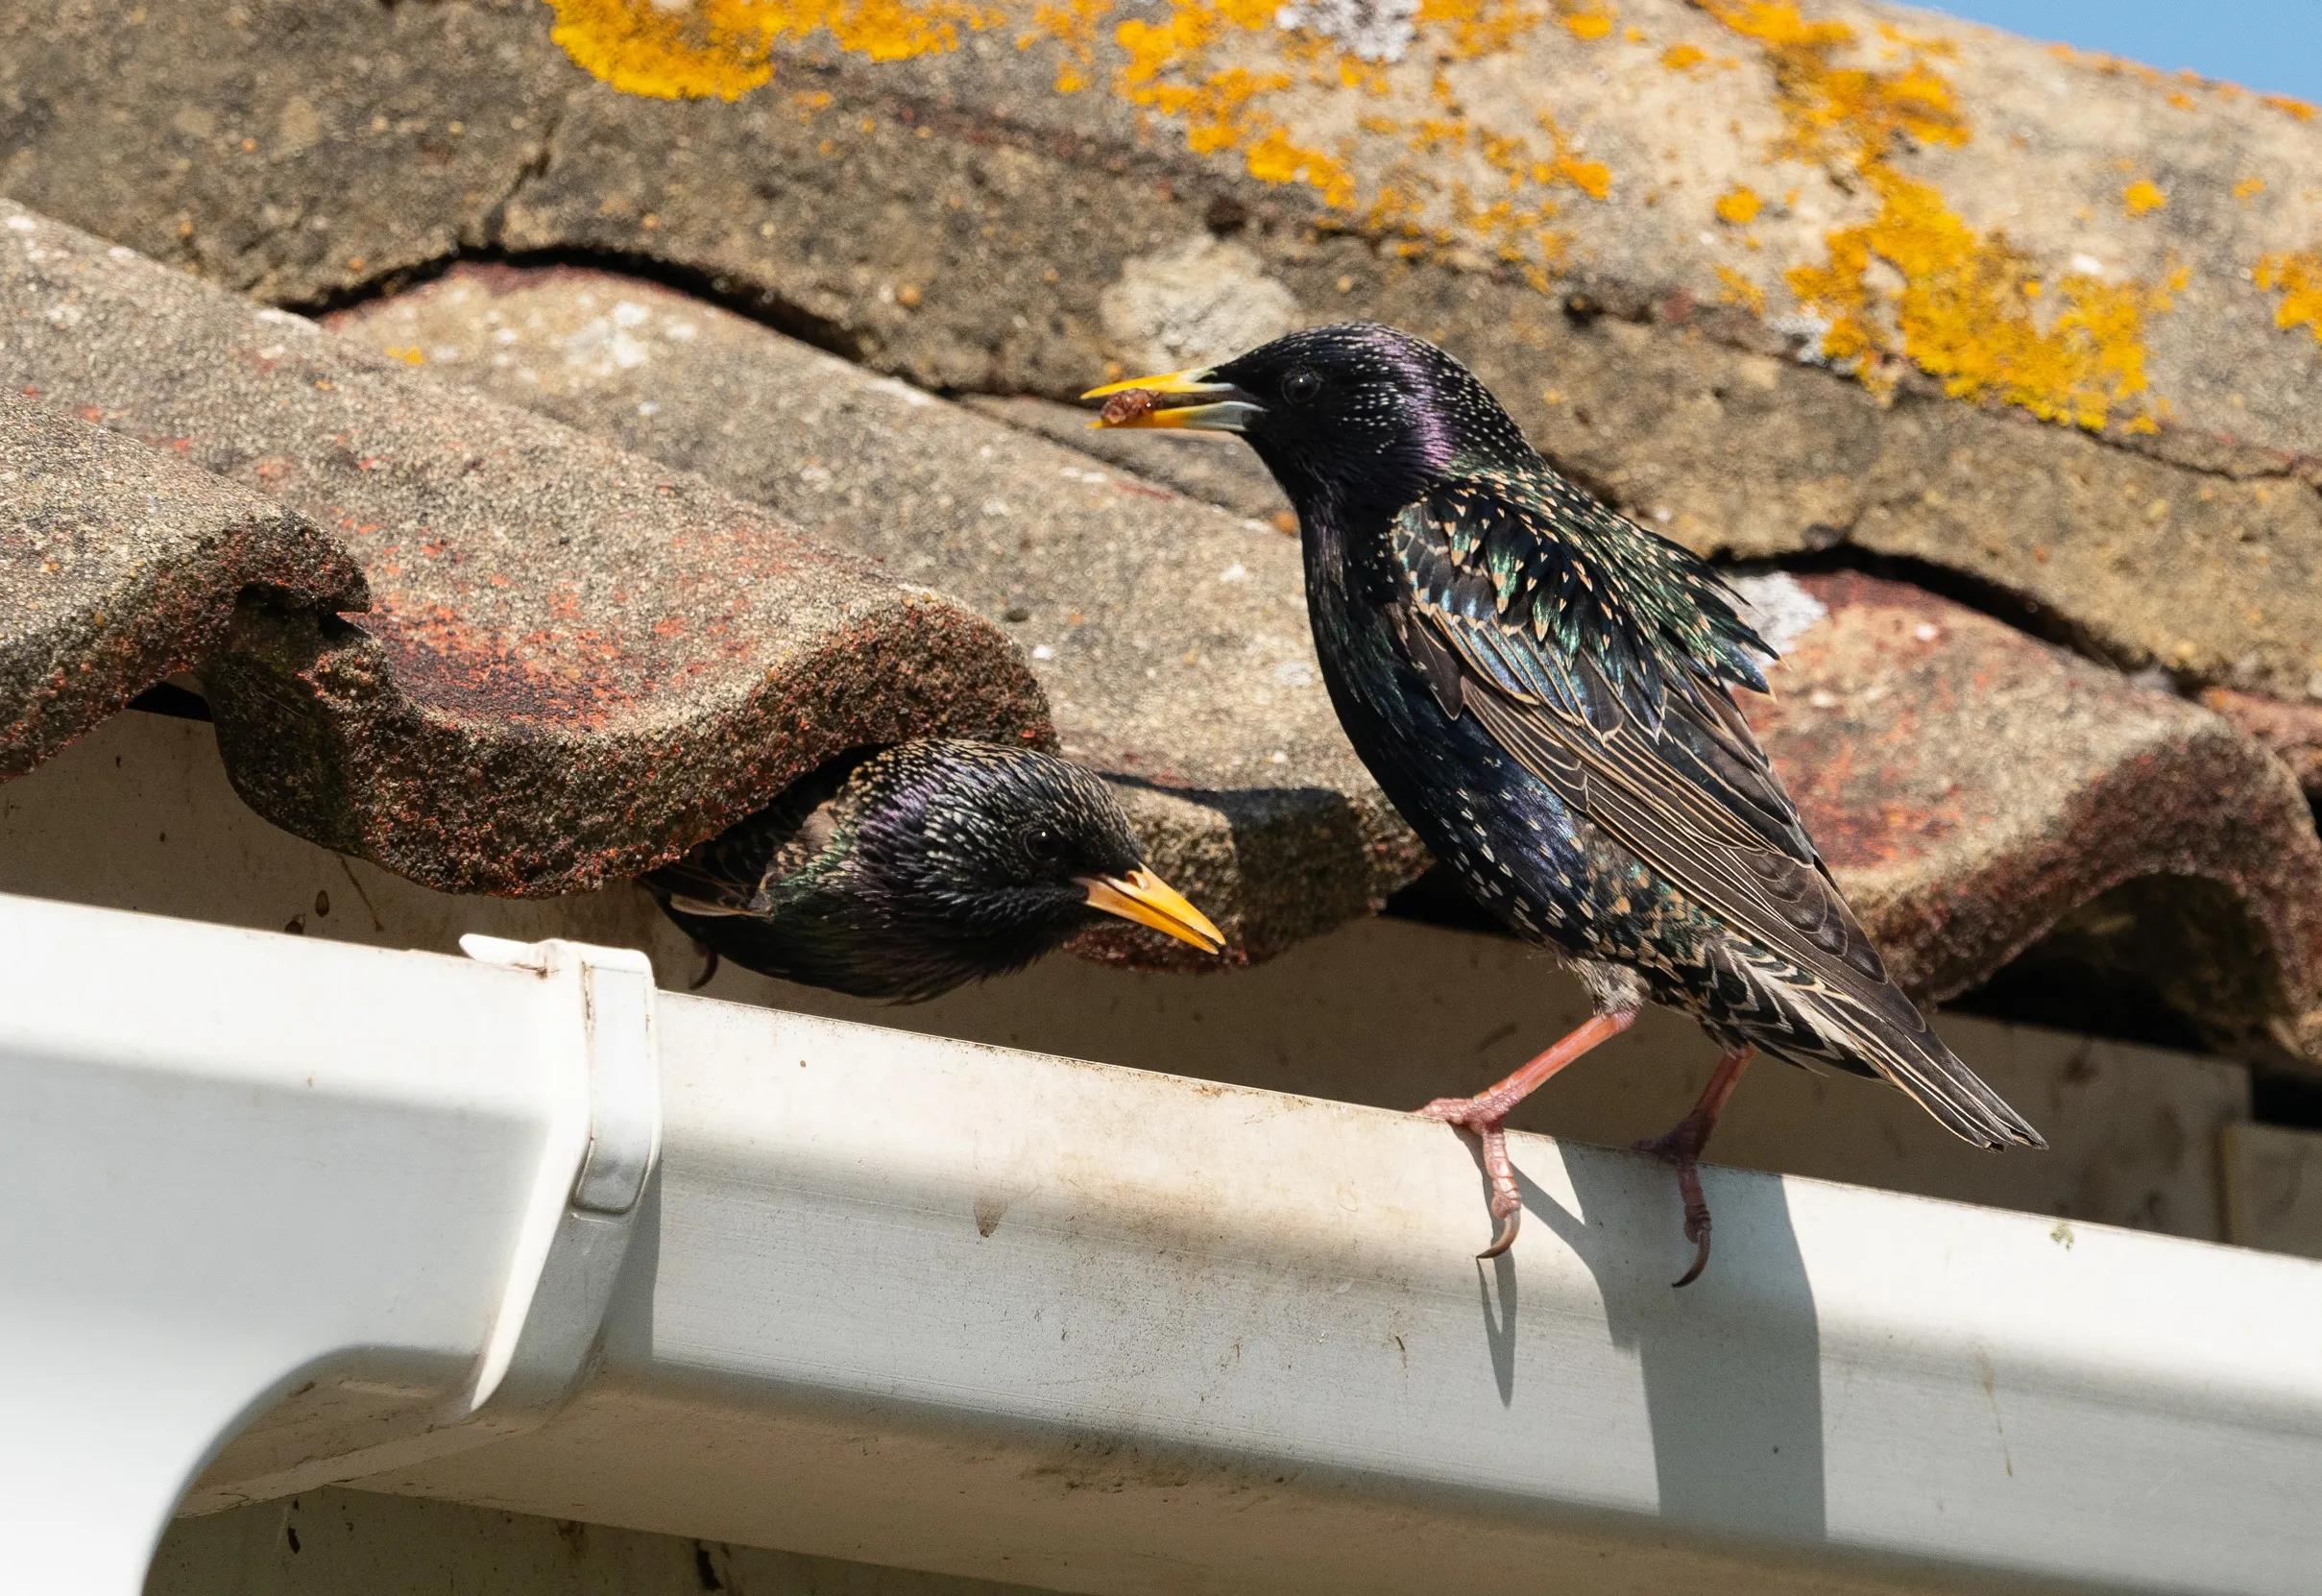 A Starling perched on guttering by their nest in the roof of a house.